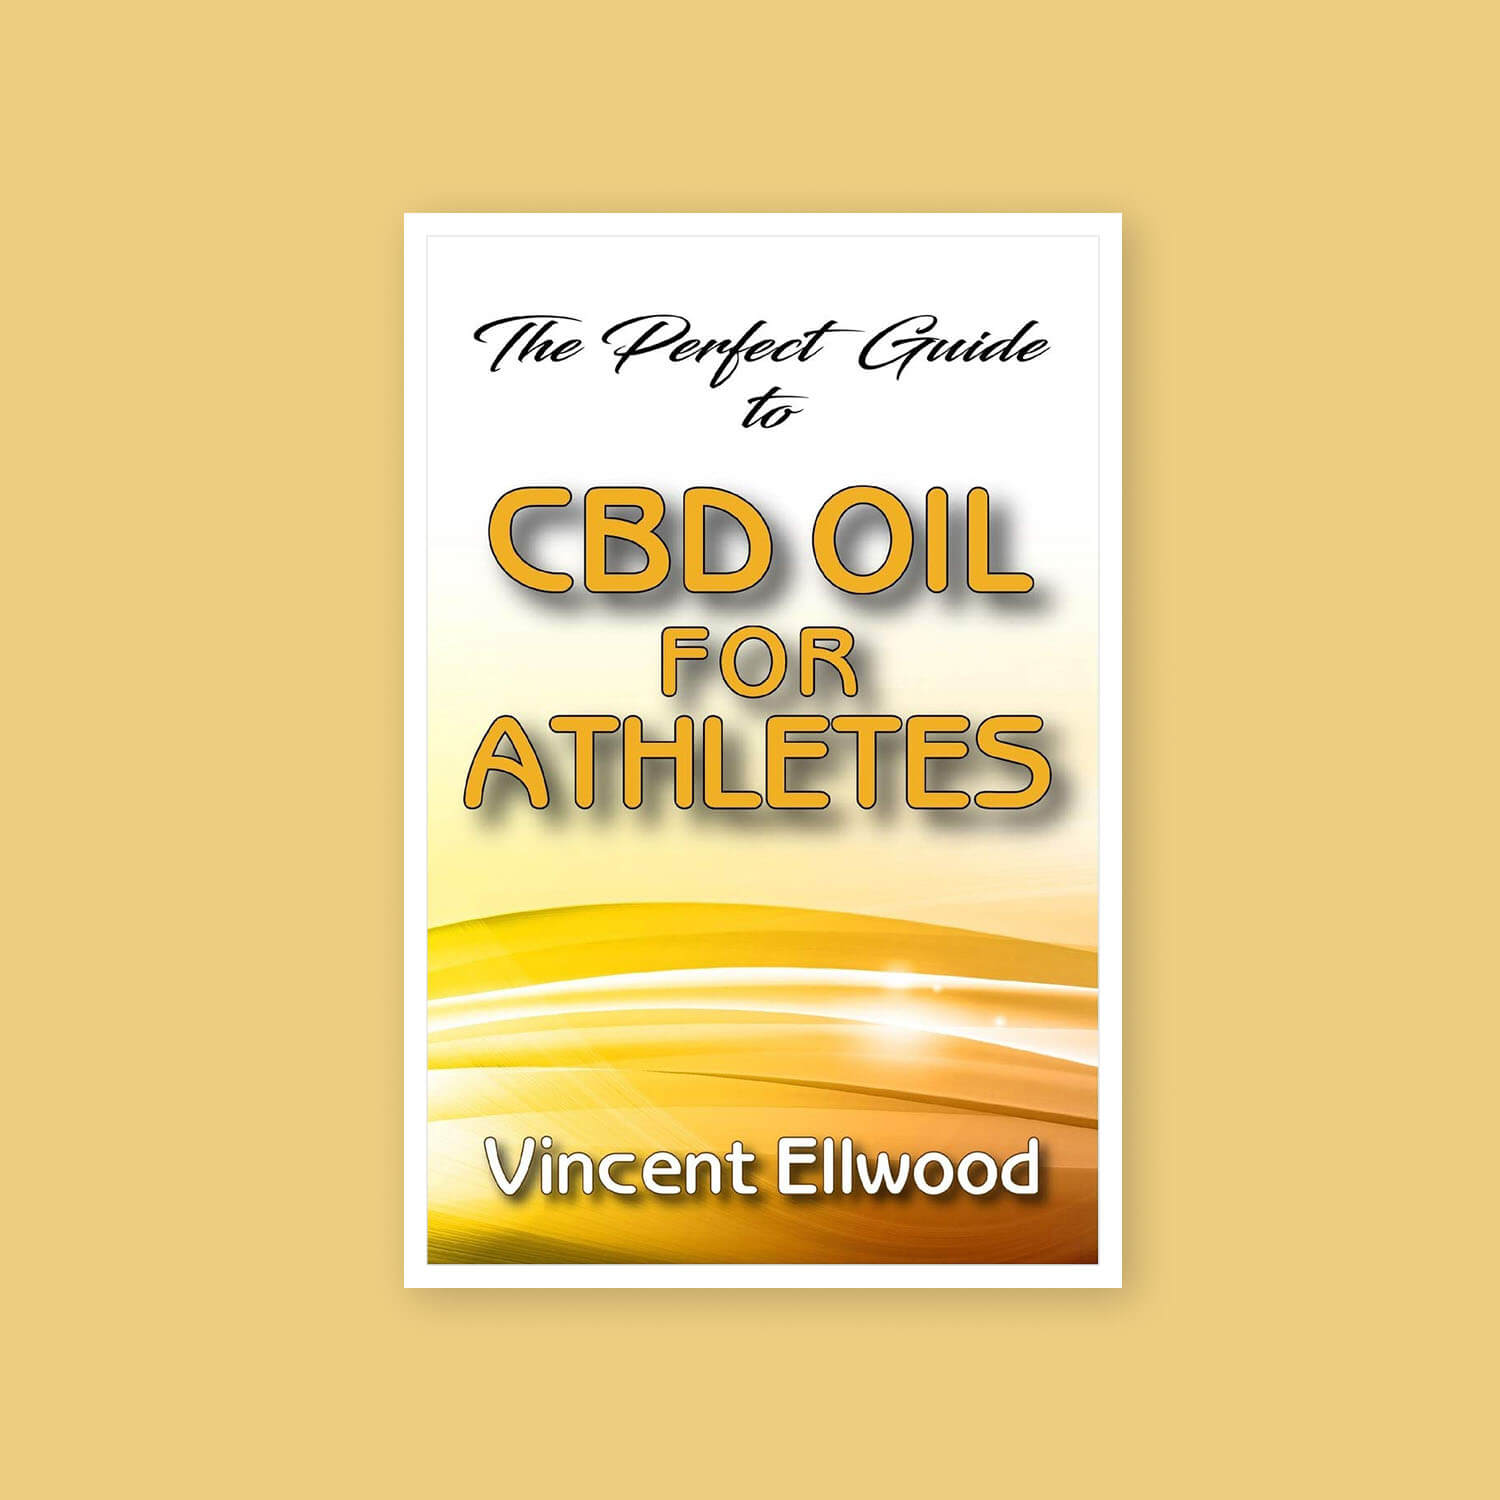 Guide to CBD oil for athletes